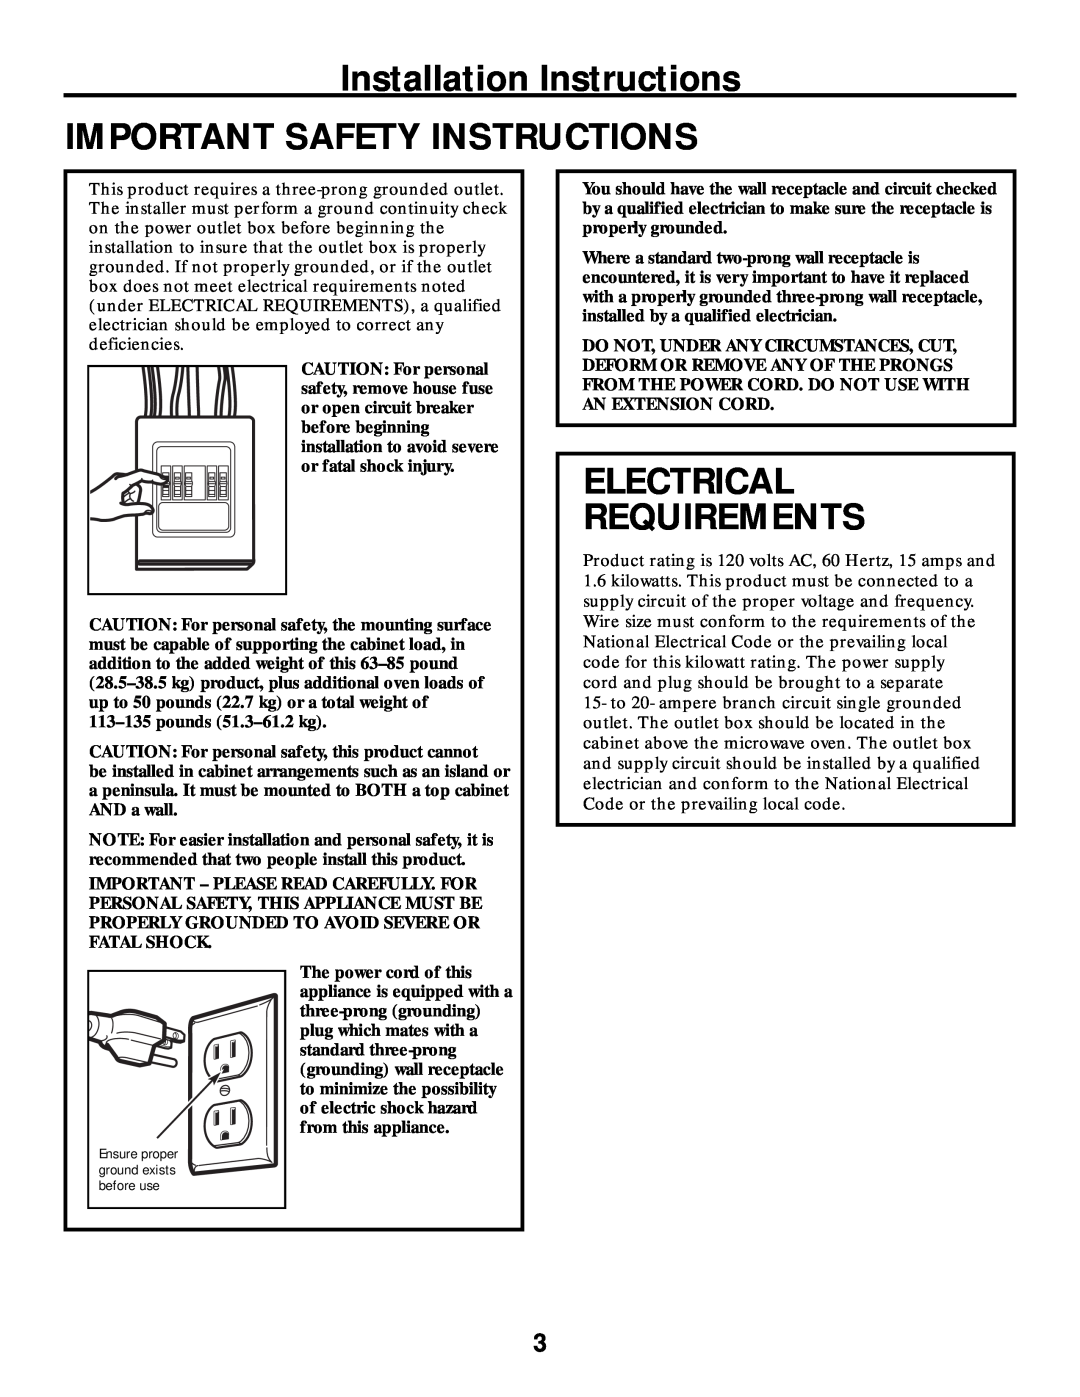 Frigidaire 316495063 warranty Installation Instructions IMPORTANT SAFETY INSTRUCTIONS, Electrical Requirements 